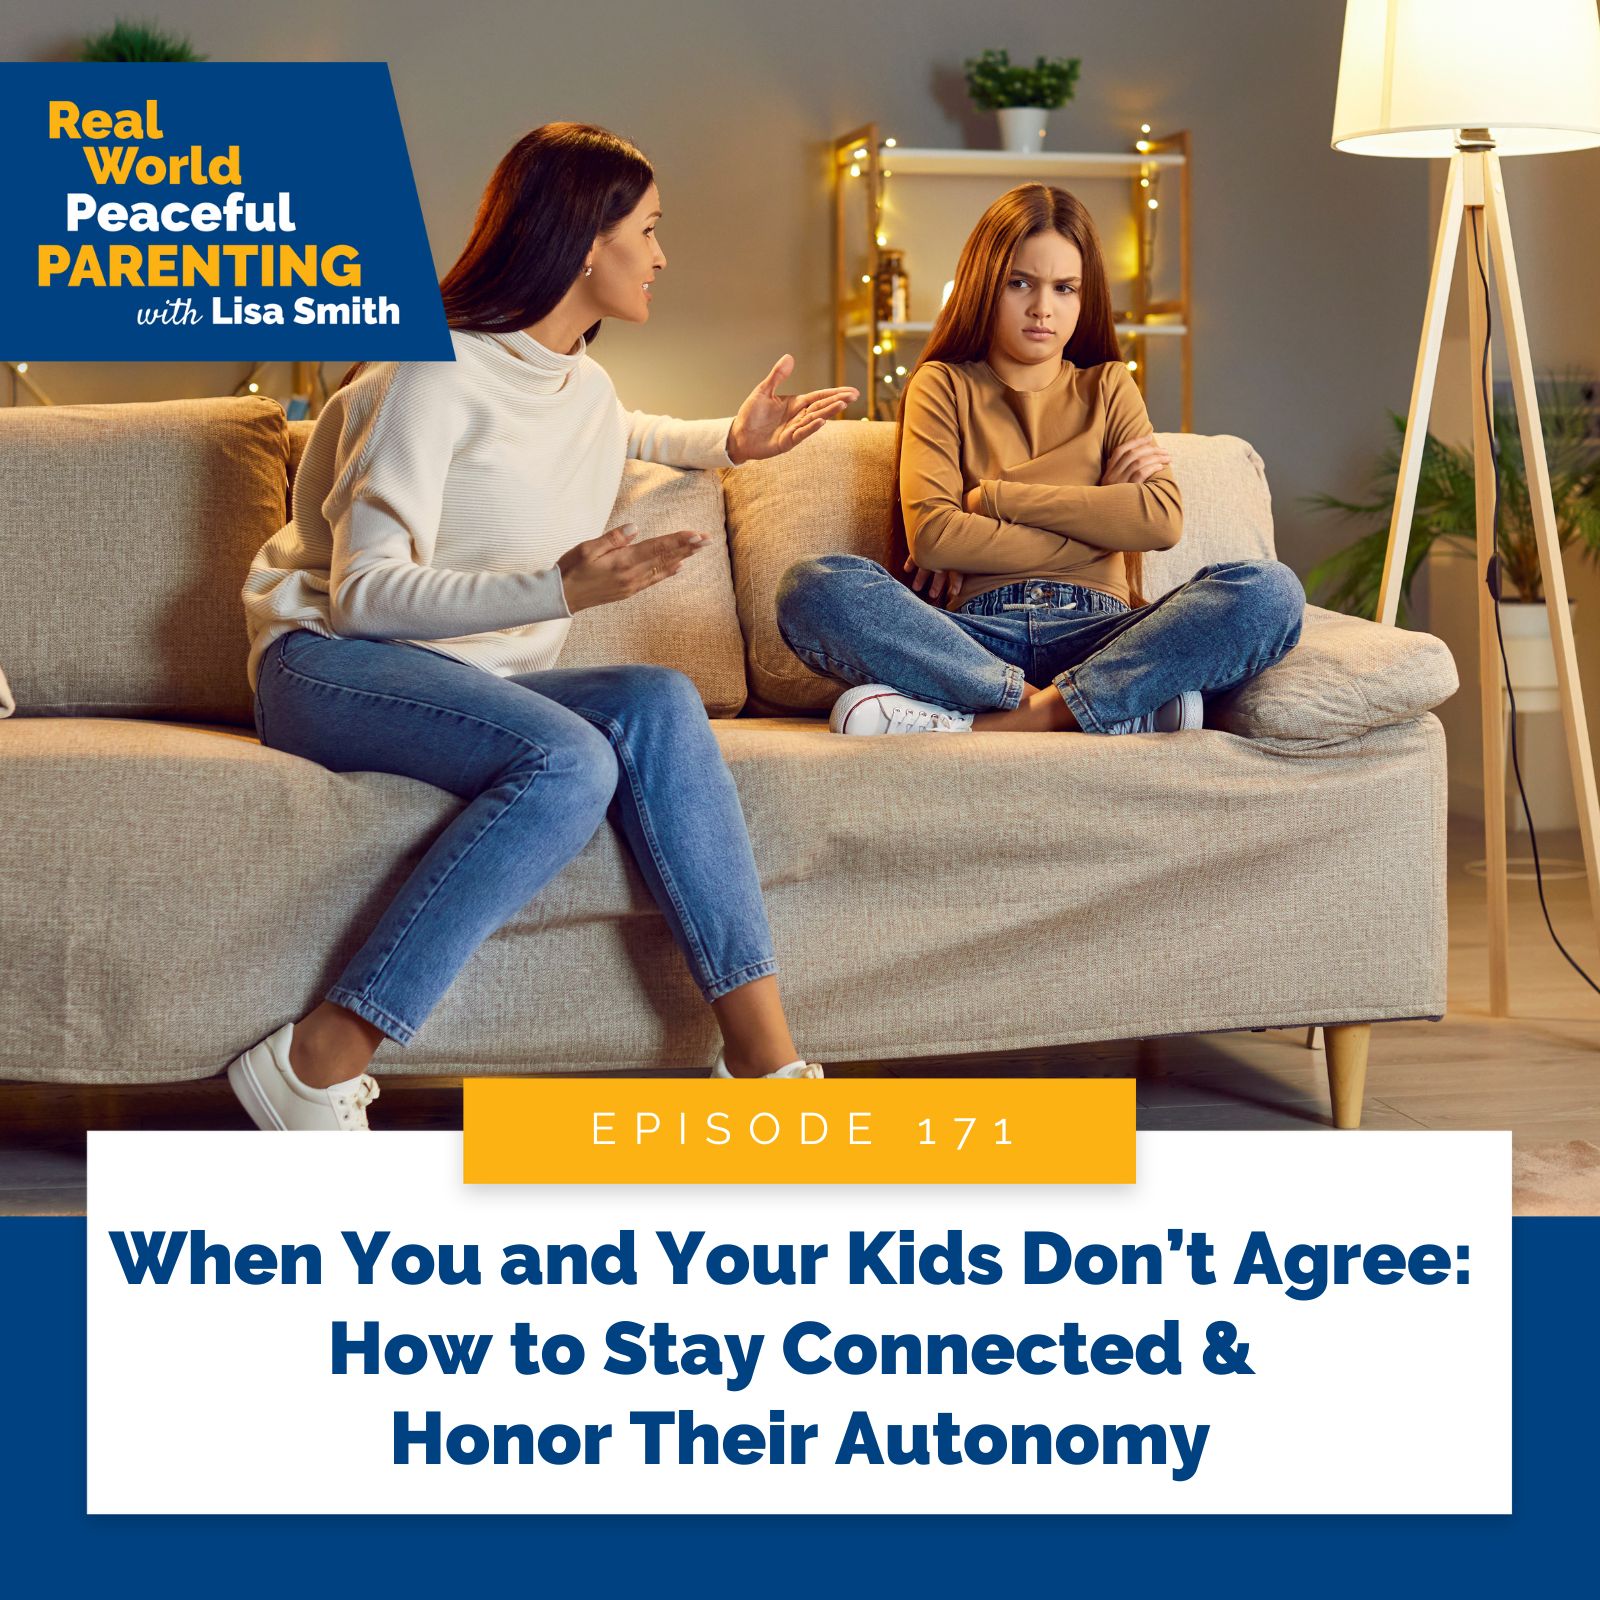 Real World Peaceful Parenting with Lisa Smith | When You and Your Kids Don’t Agree: How to Stay Connected & Honor Their Autonomy